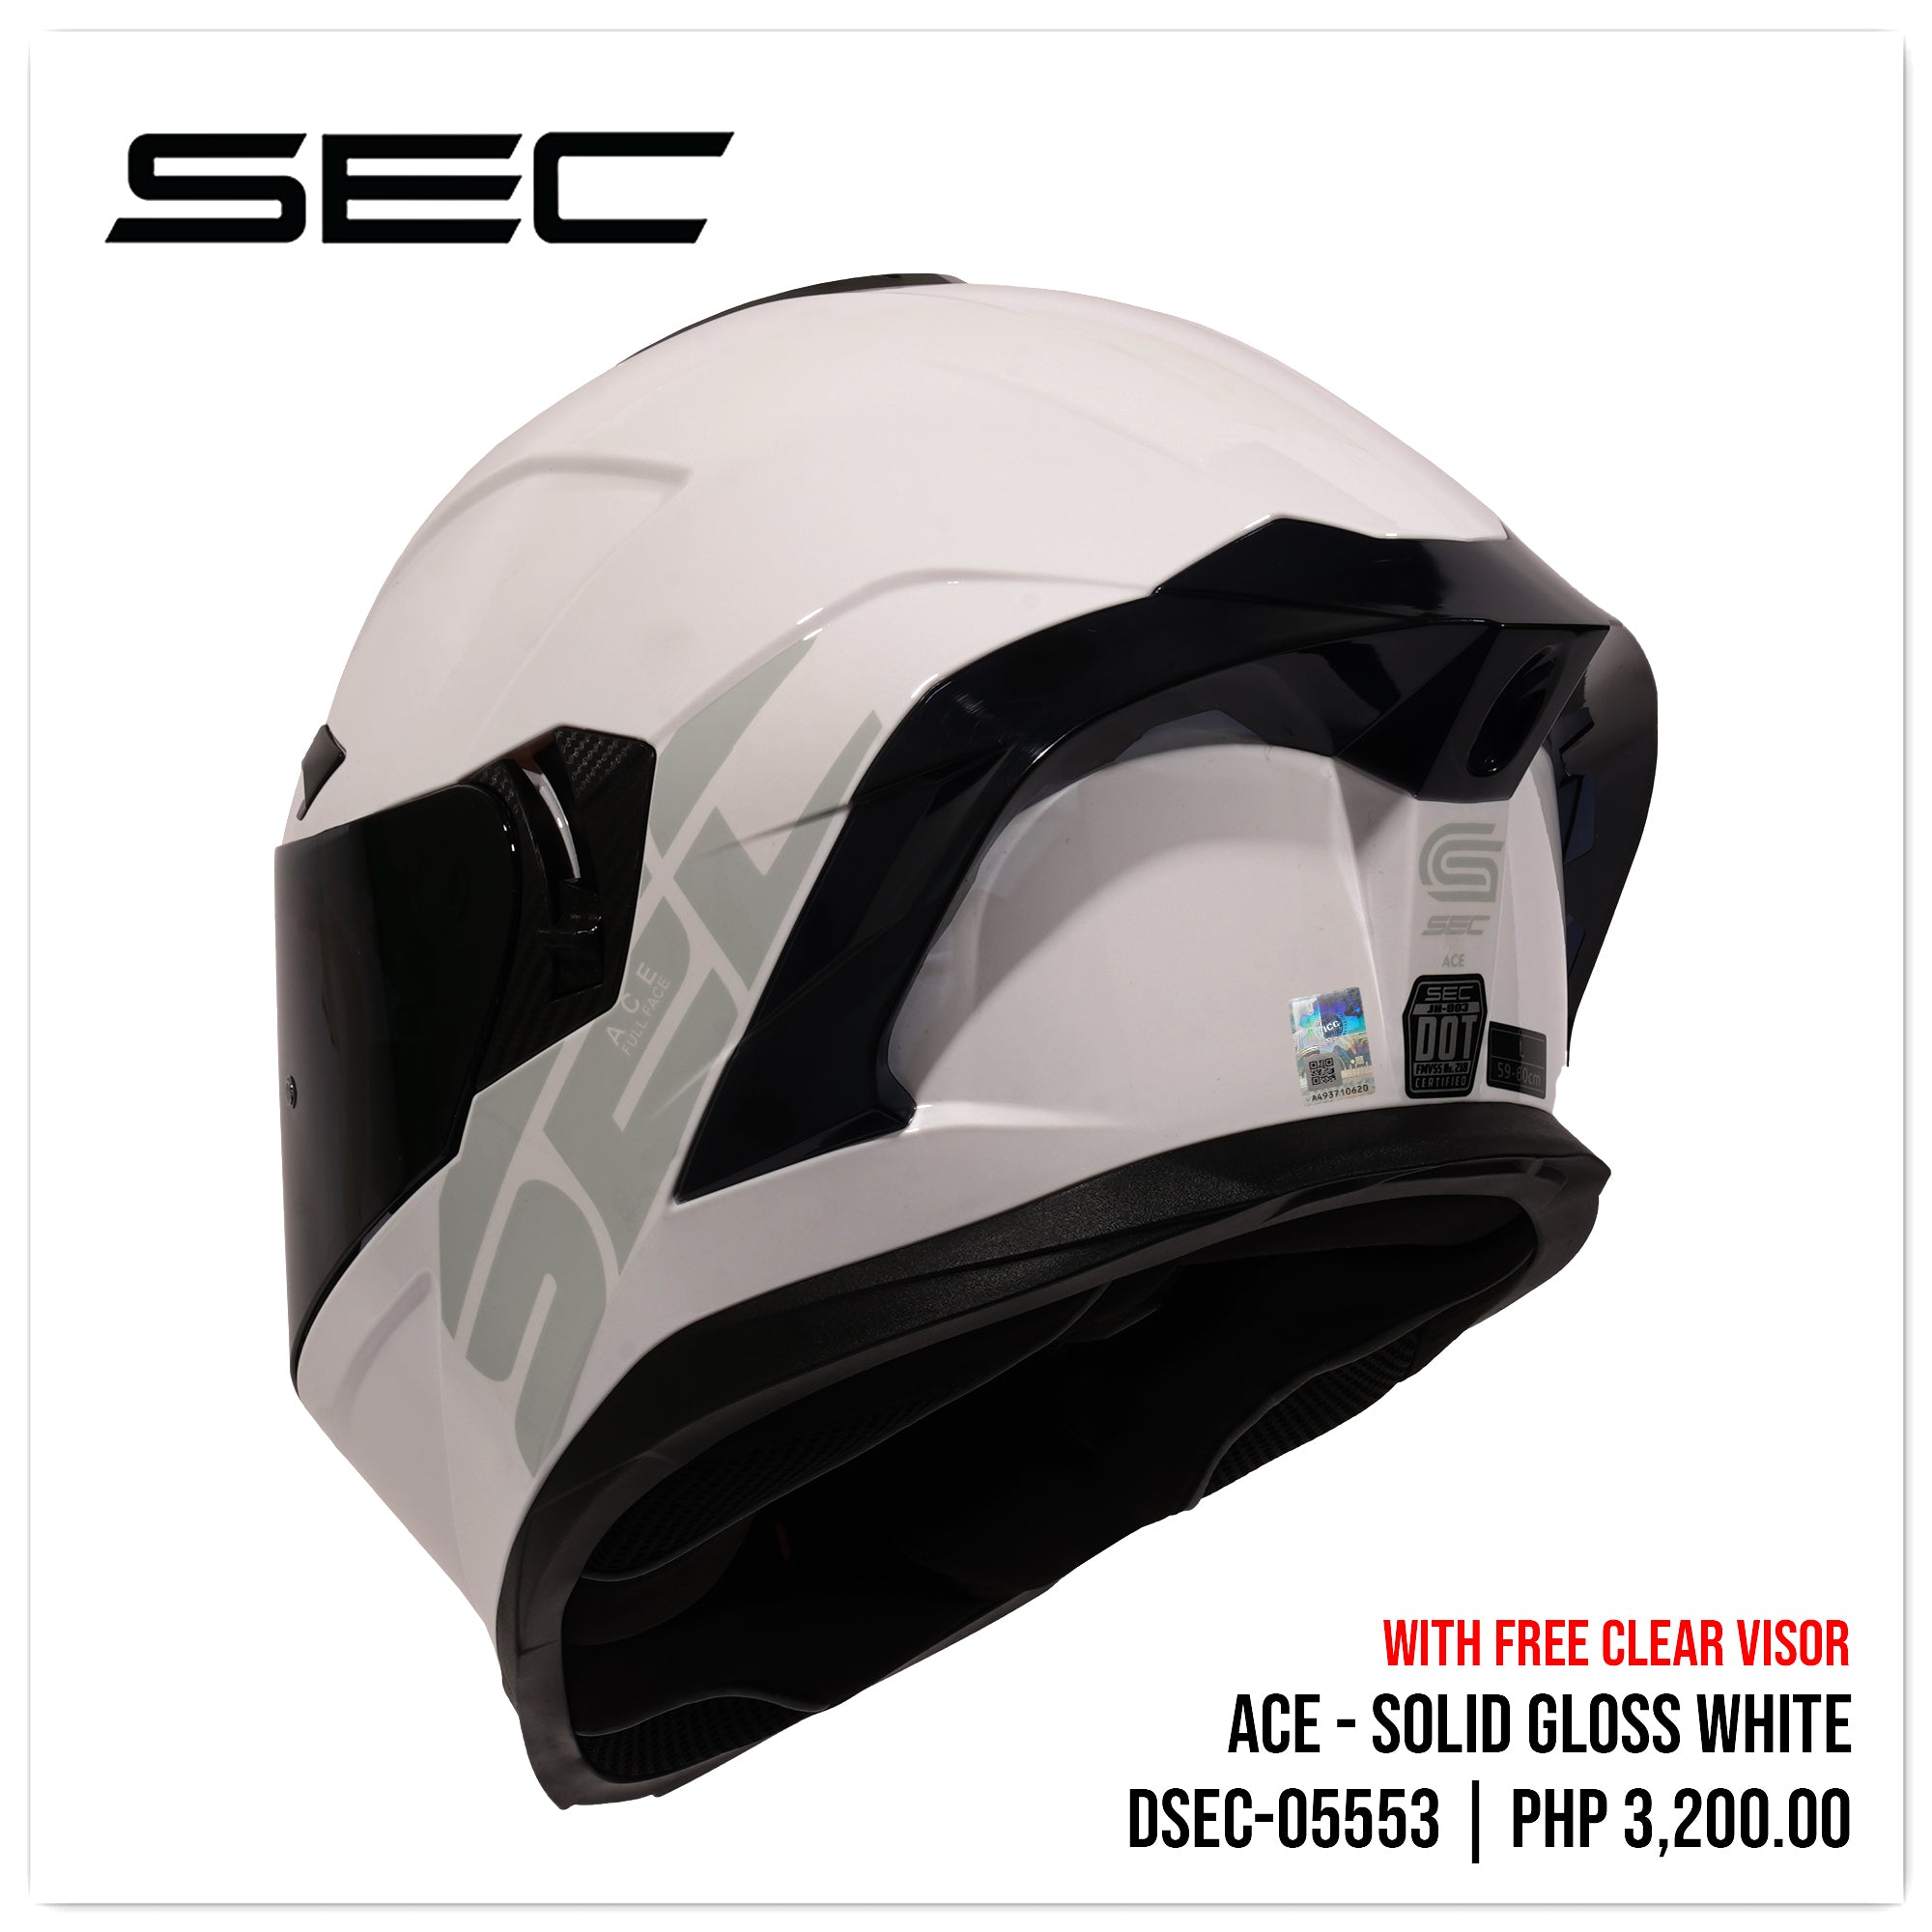 ACE - SOLID GLOSS WHITE